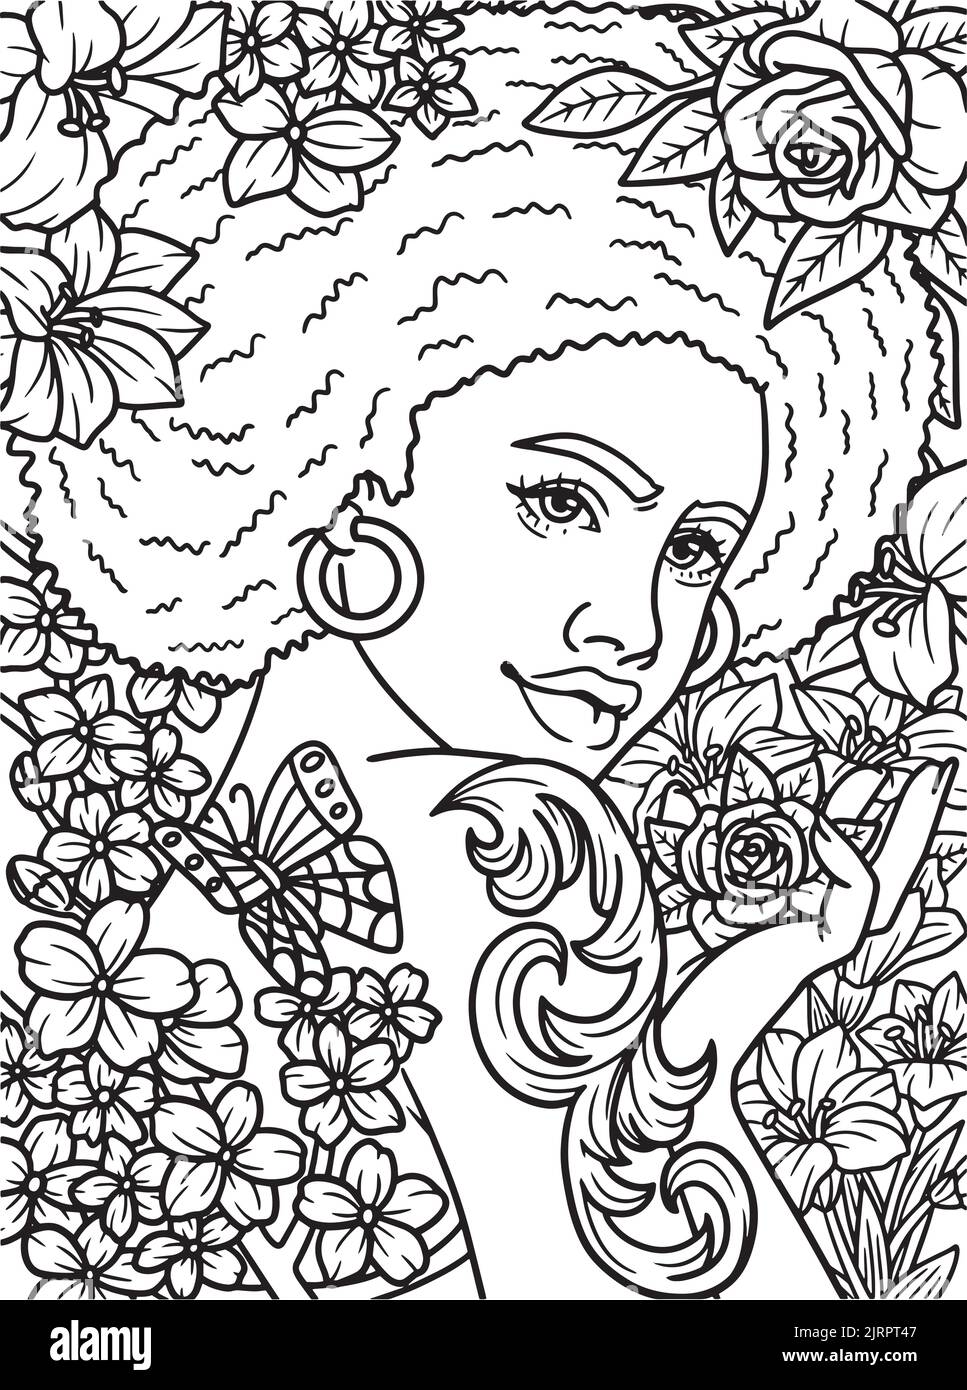 Afro American Girl Butterfly Coloring Page  Stock Vector